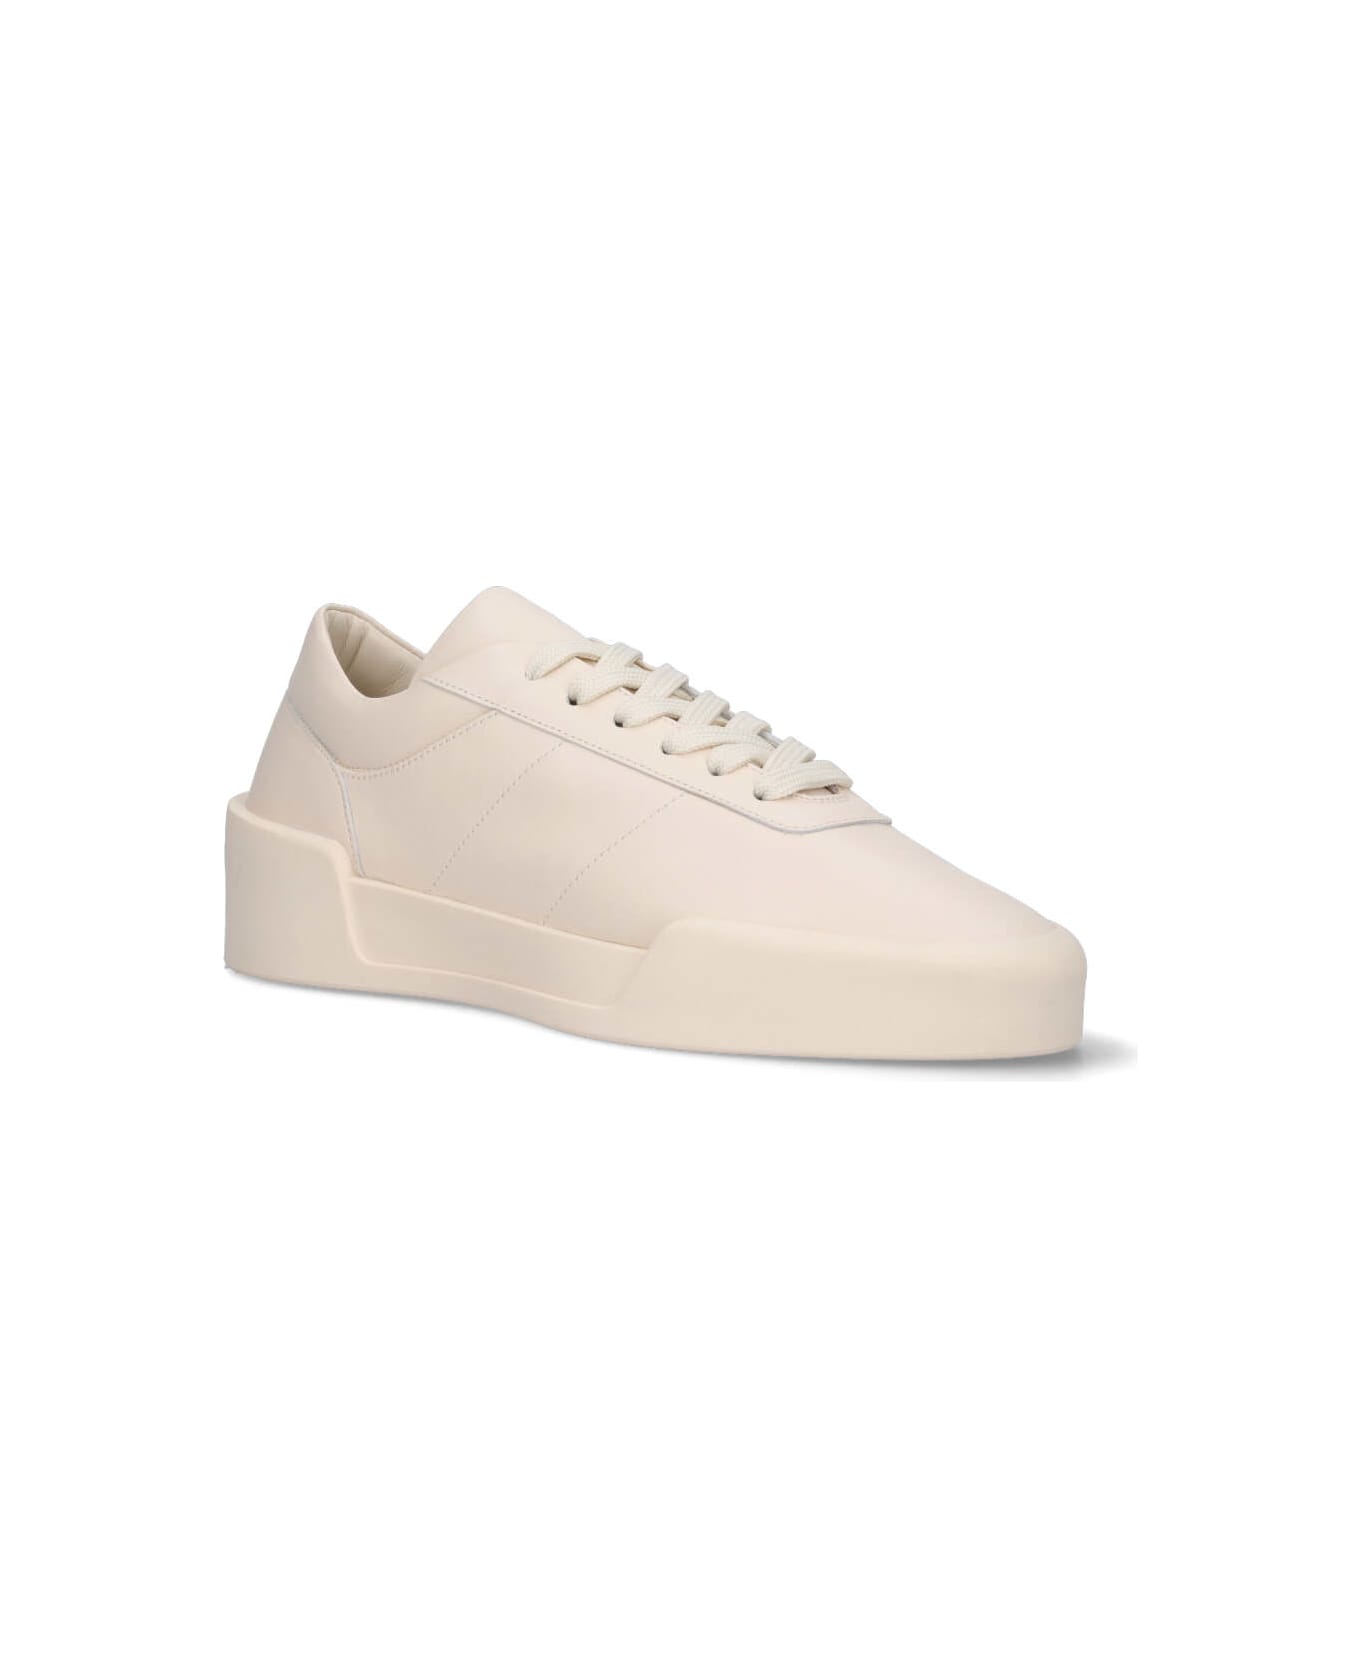 Fear of God 'aerobic Low' Sneakers - Crema スニーカー